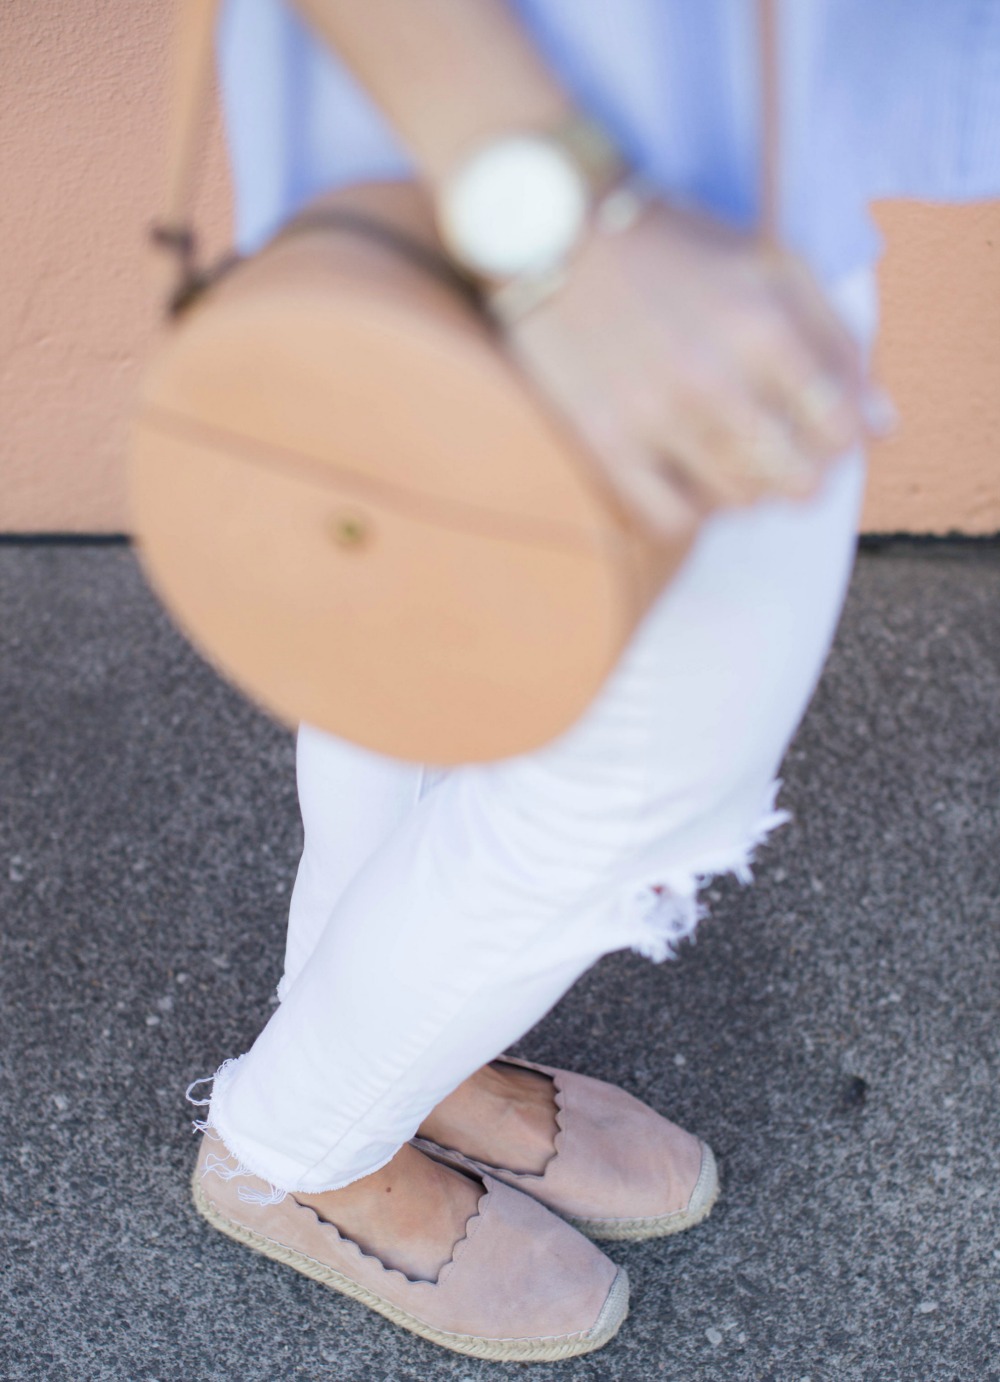 circle leather bag details -- love this summer accessory! // the modern savvy, a life & style blog